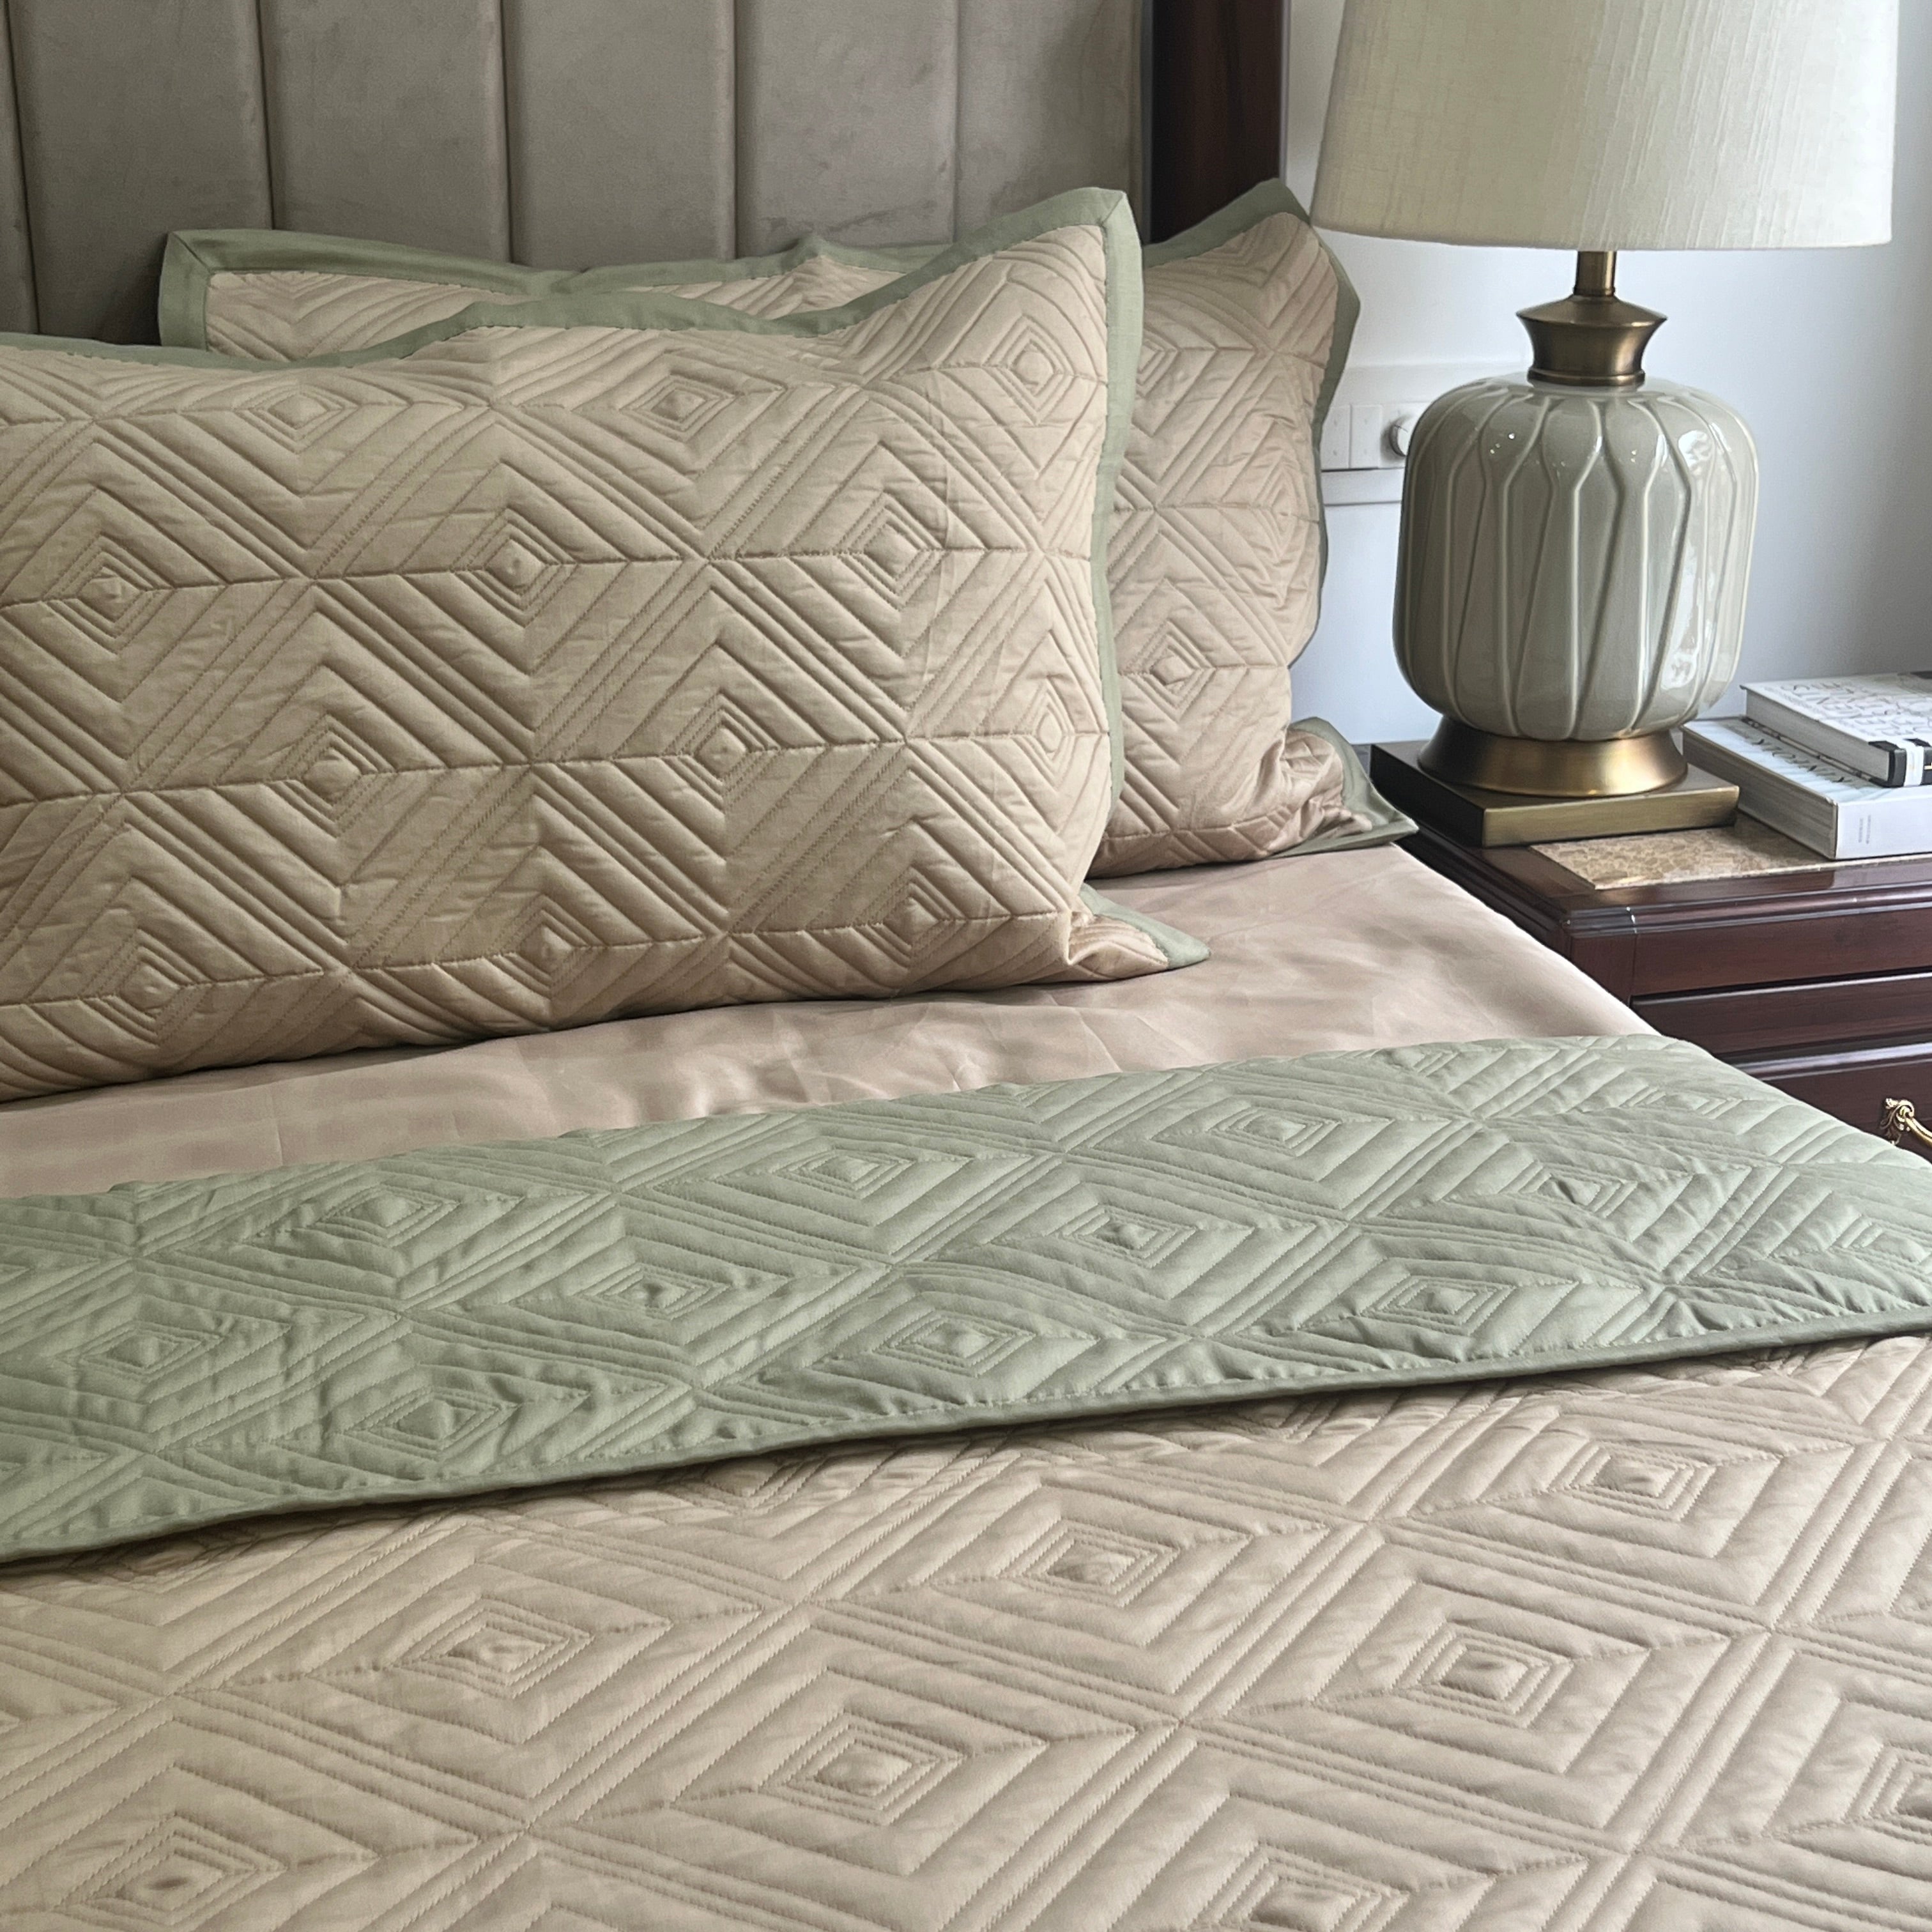 Quilted Forest Green and Sand Ripple Reversible Bedspread